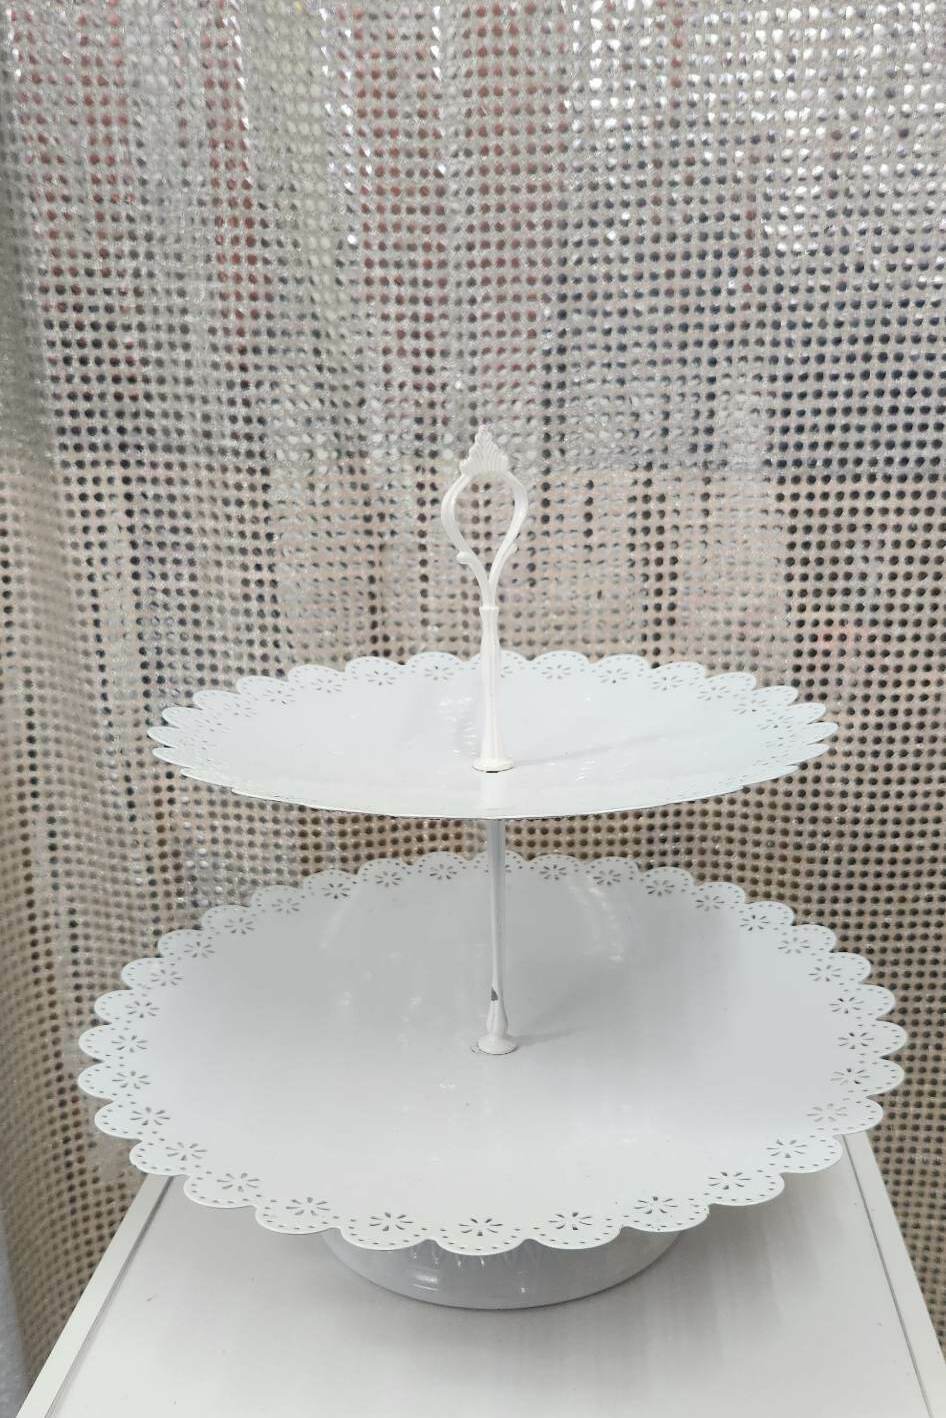 Tiered White Cupcake Stand - $10